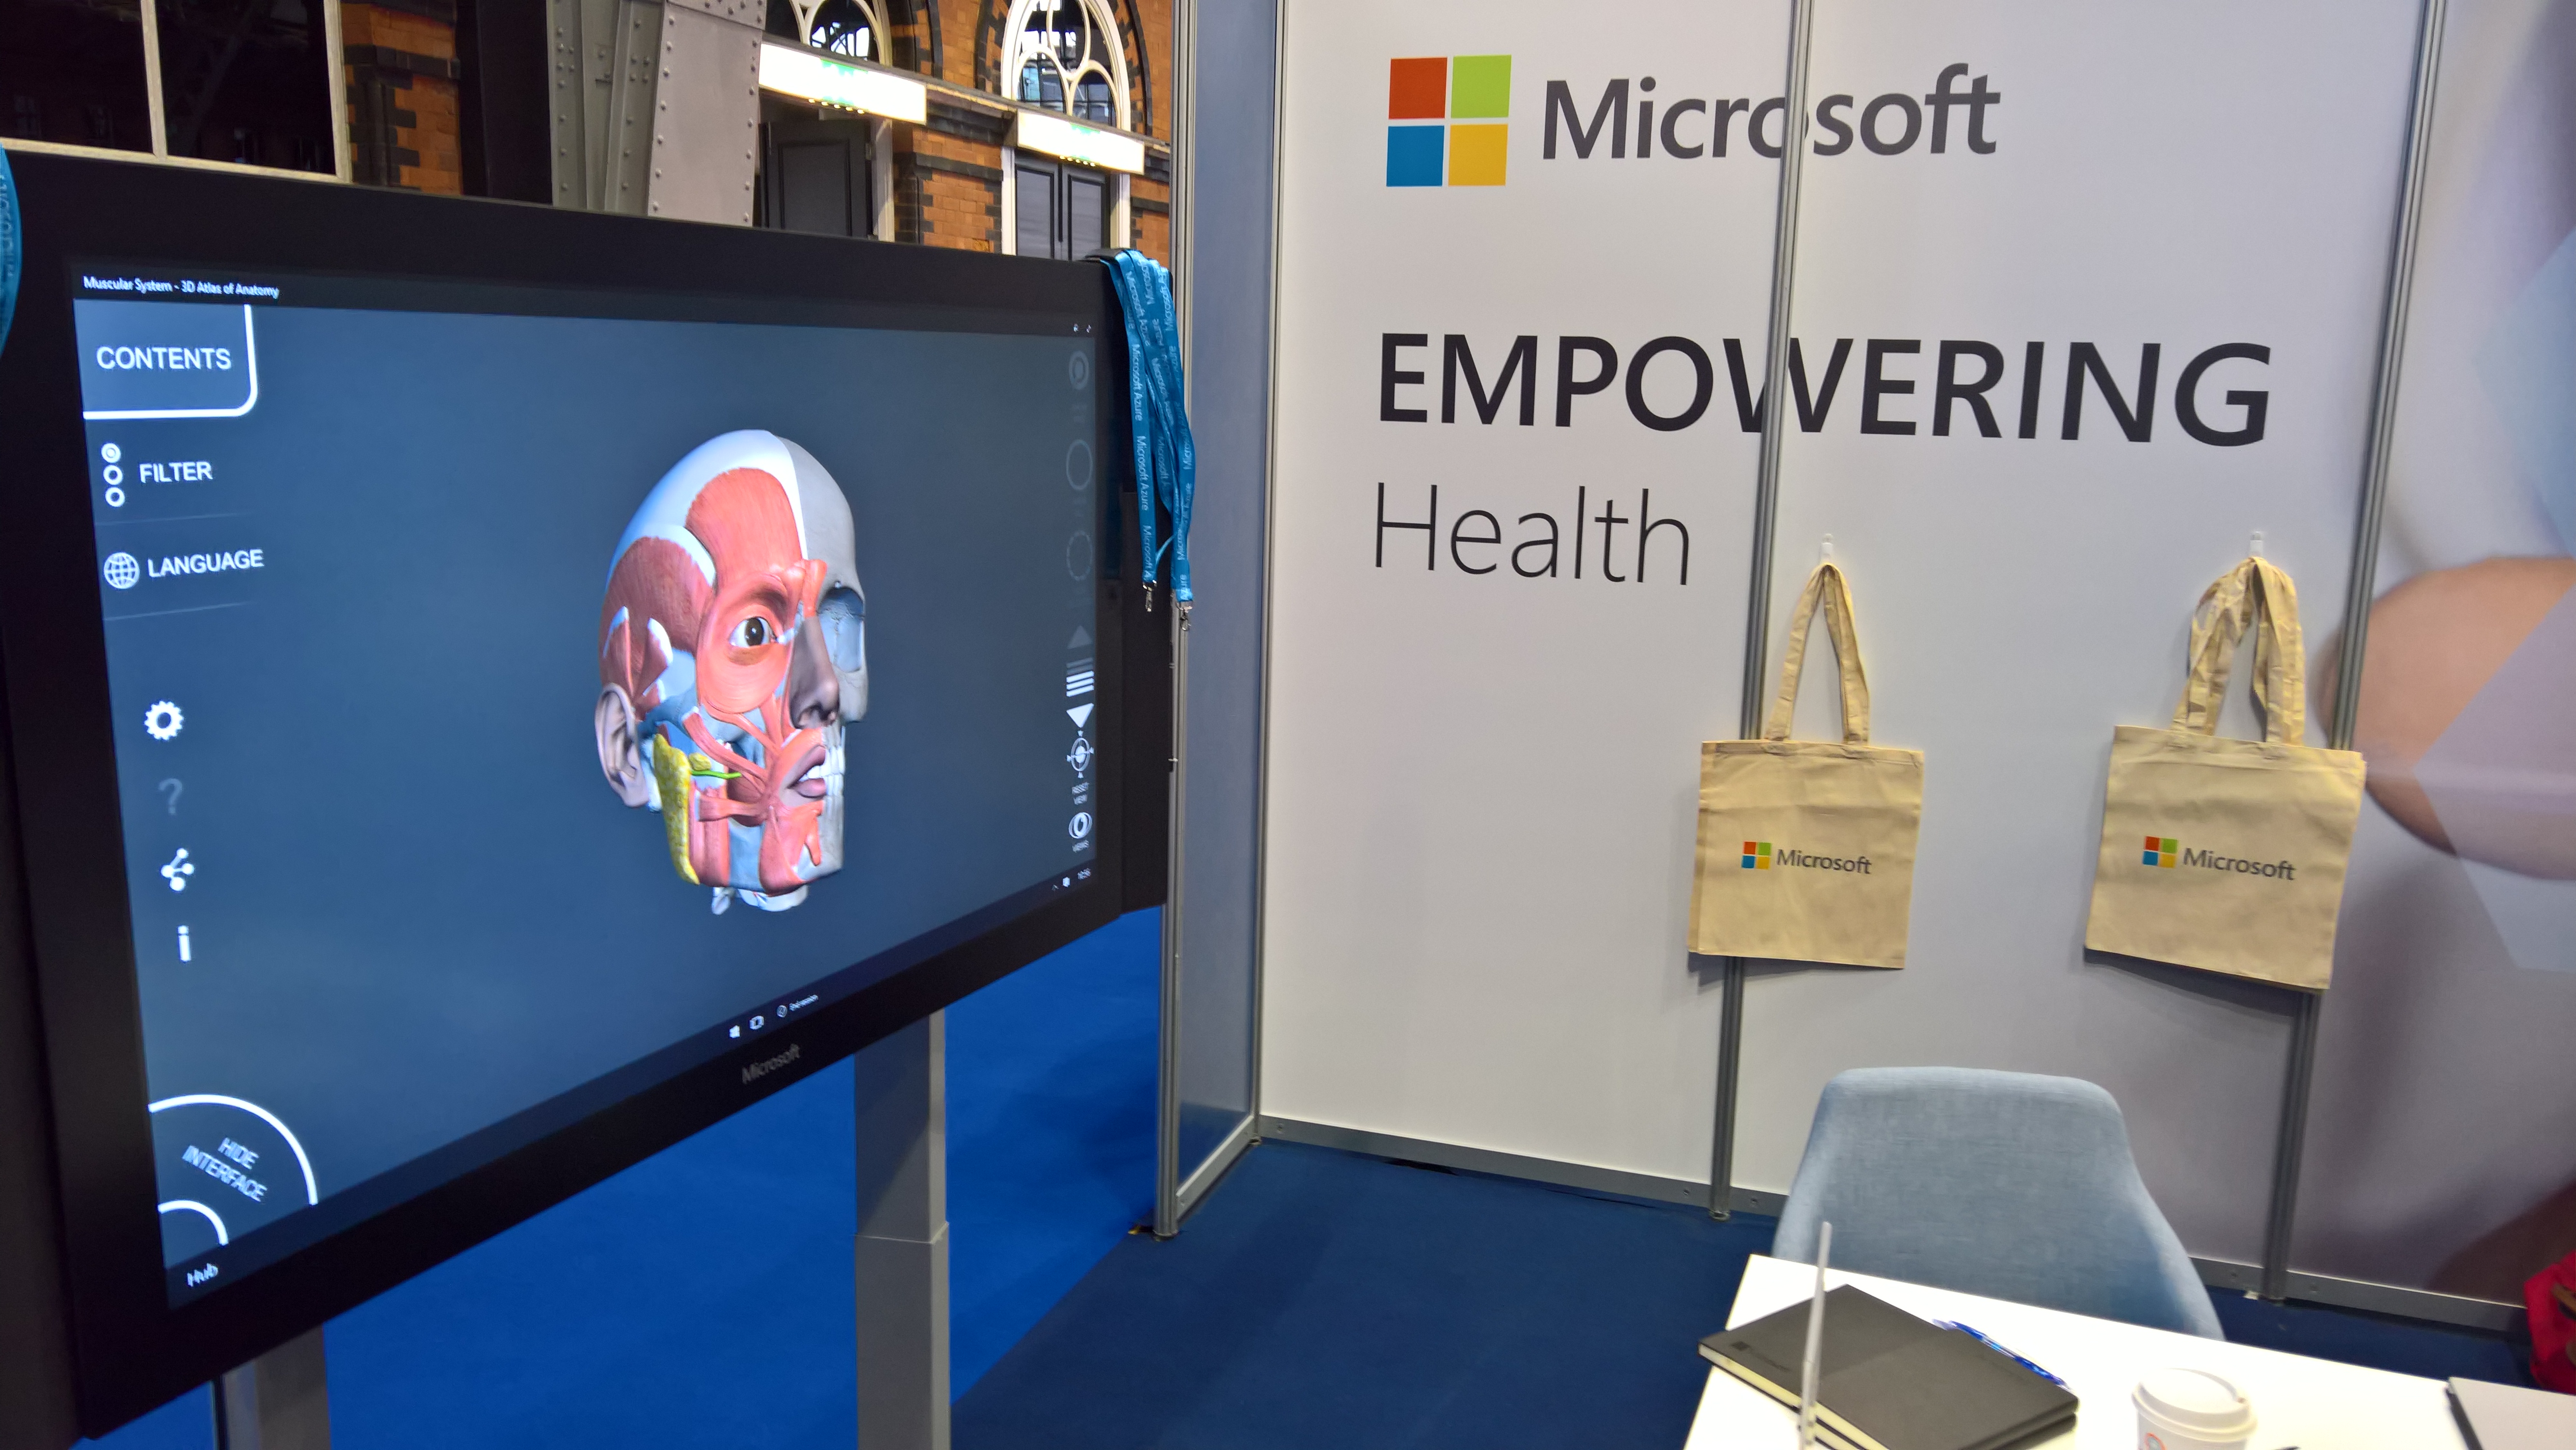 Microsoft's stand at the NHS expo